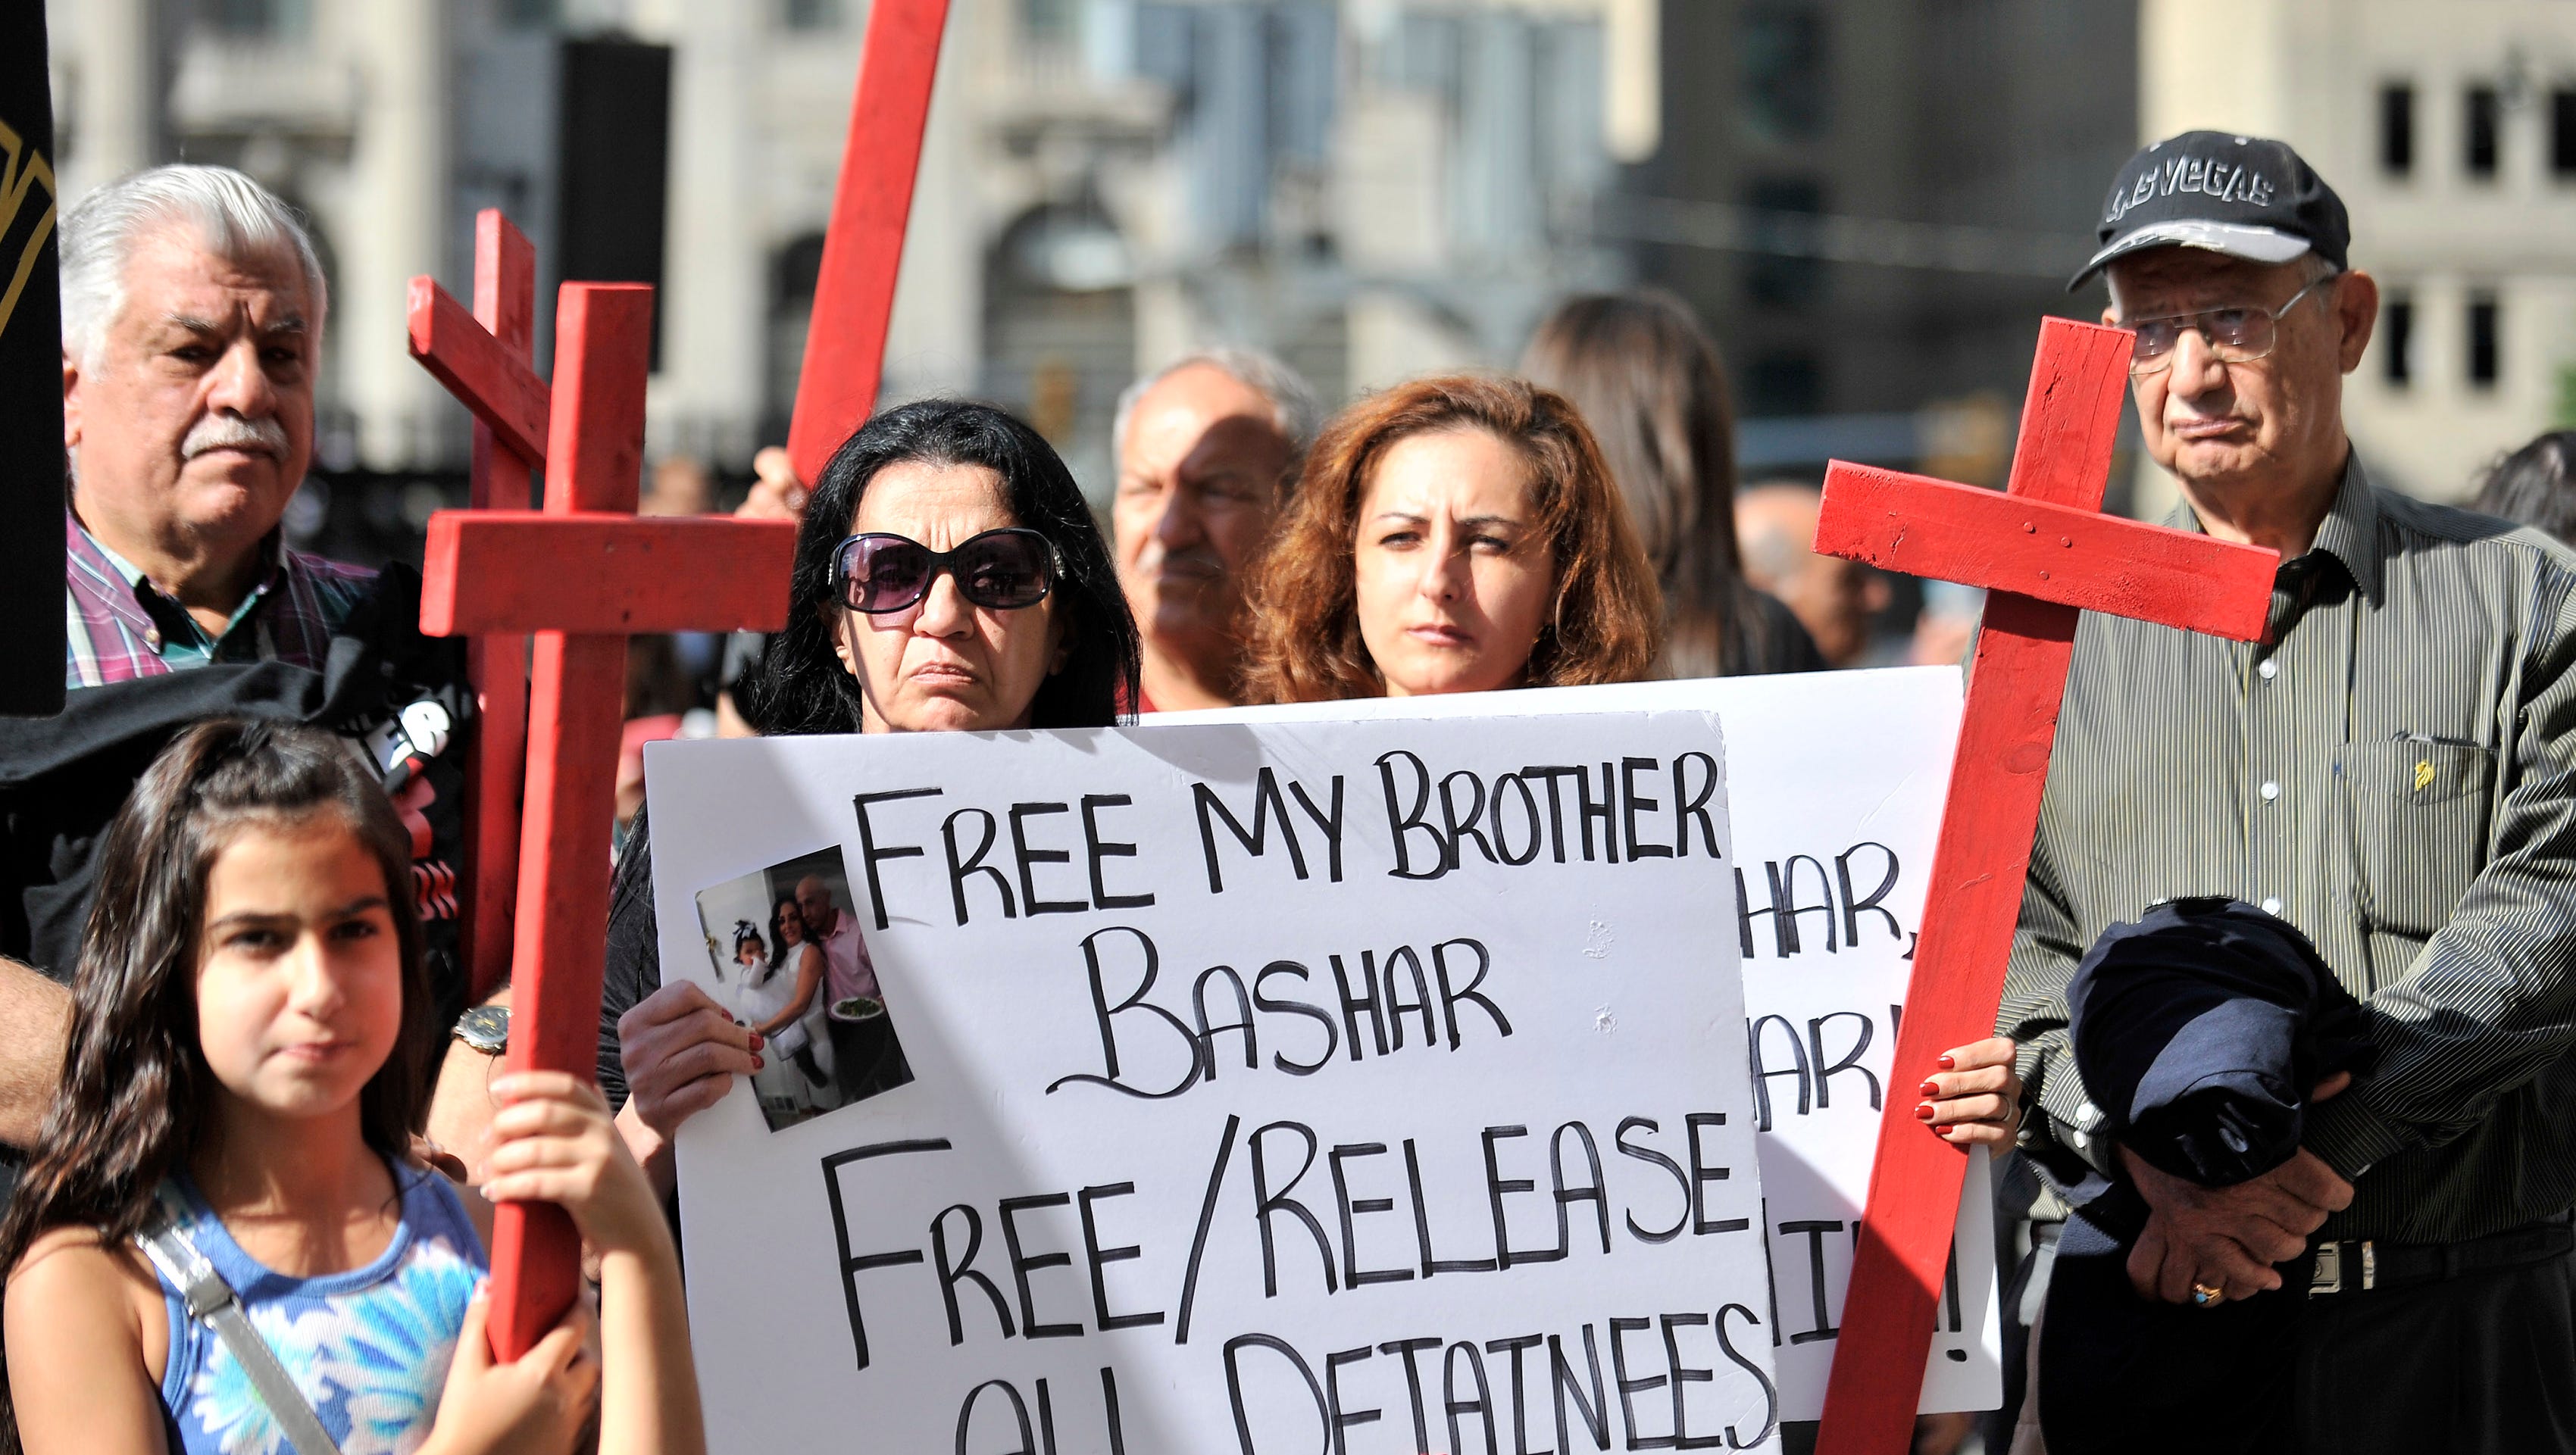 Ghada Babbie of Farmington Hills, wearing sunglasses, and her sister-in-law, Sonya Babbie, of Warren demonstrate for relative Bashar Babbie at a rally outside federal court Thursday in Detroit in support of Iraqis detained by Immigration and Customs Enforcement.